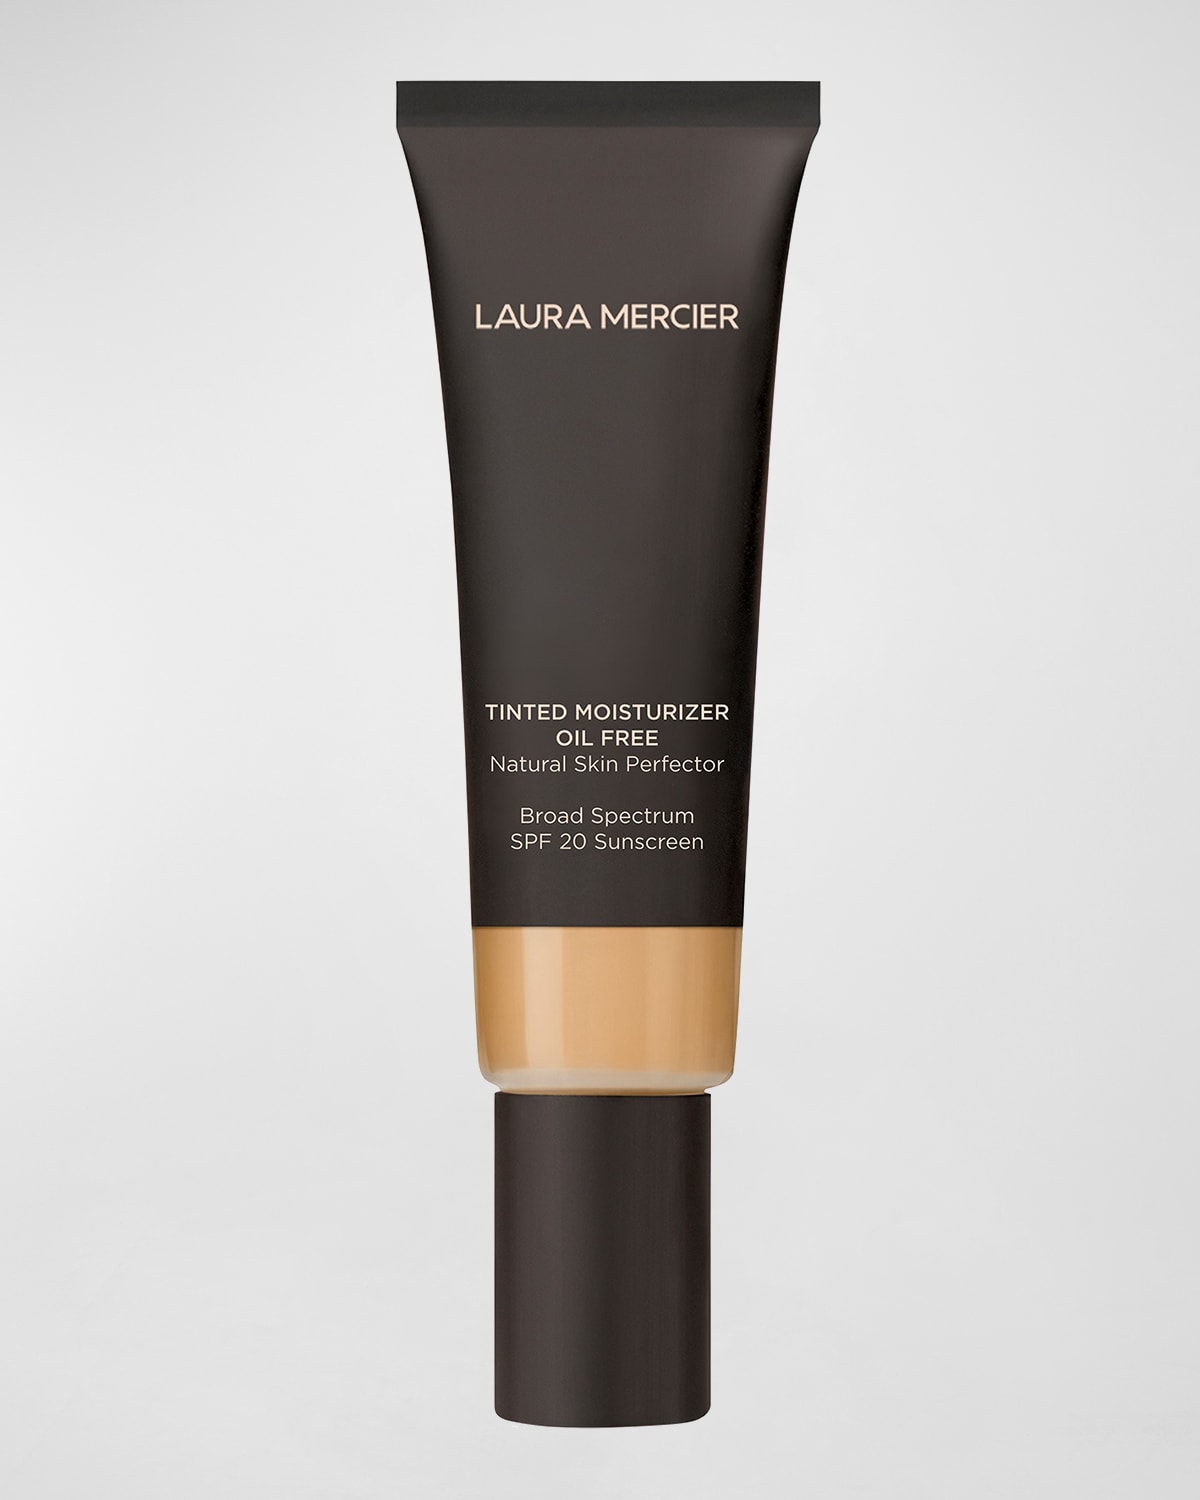 Tinted Moisturizer Oil-Free Natural Skin Perfector SPF 20